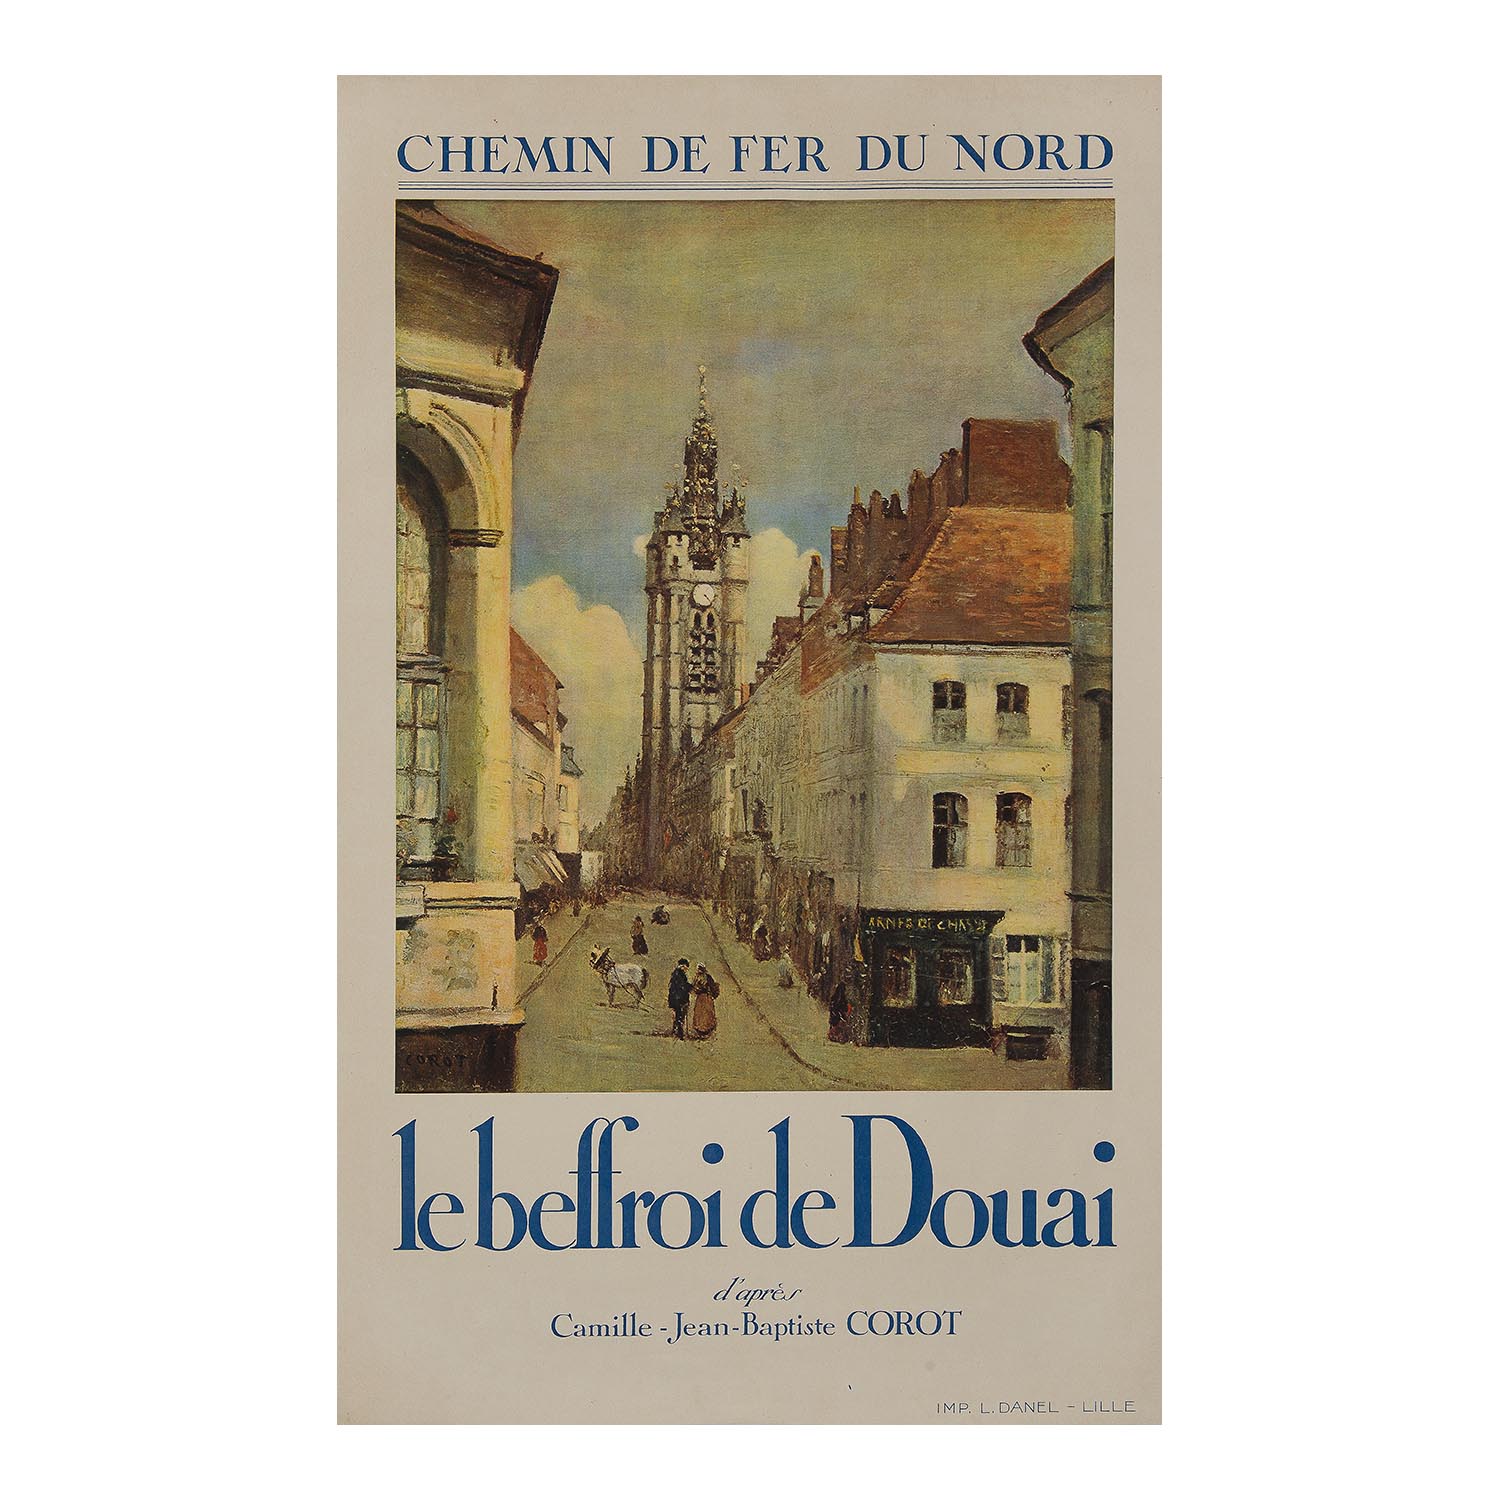 An original French railway poster published by the Chemins de fer du Nord, featuring the famous painting Le Beffroi de Douai (the belfry of Douai) by Jean-Baptiste Camille Corot (1871), published in about 1930. 